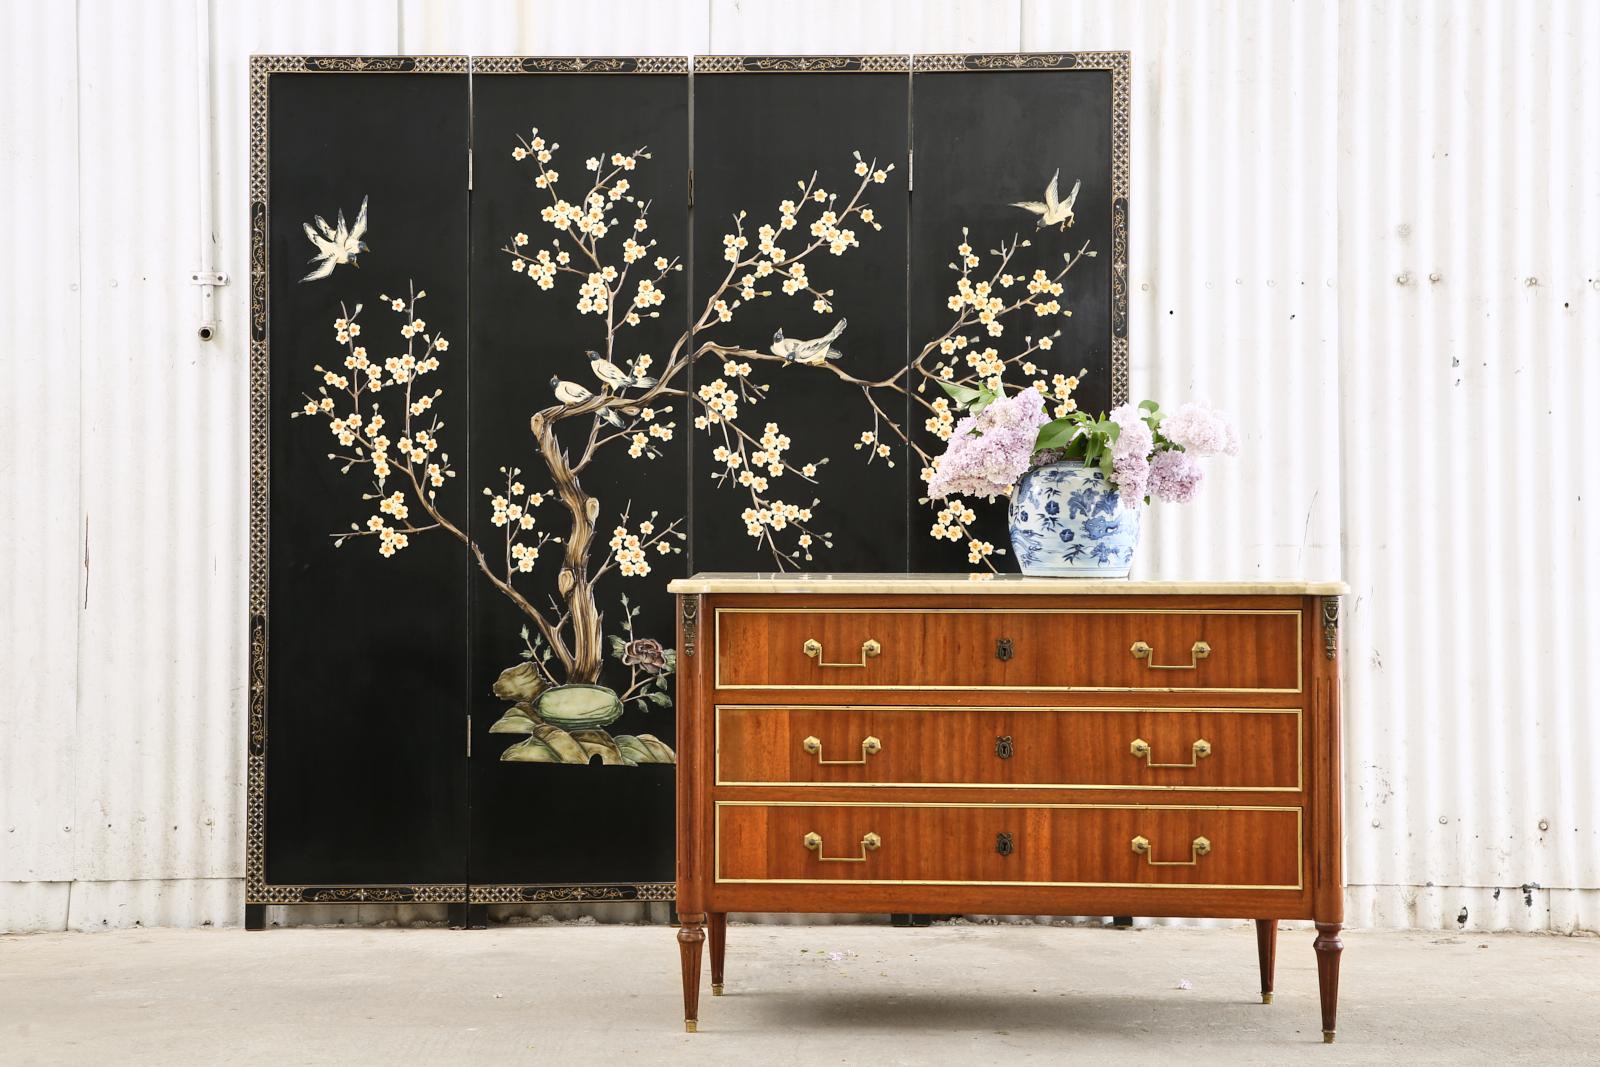 Cheerful Chinese export four-panel coromandel screen featuring carved soapstone. The lacquered panels depict a large blossoming spring tree with songbirds. The scene is bordered by a geometric parcel-gilt frame on the edge of each panel. The lacquer